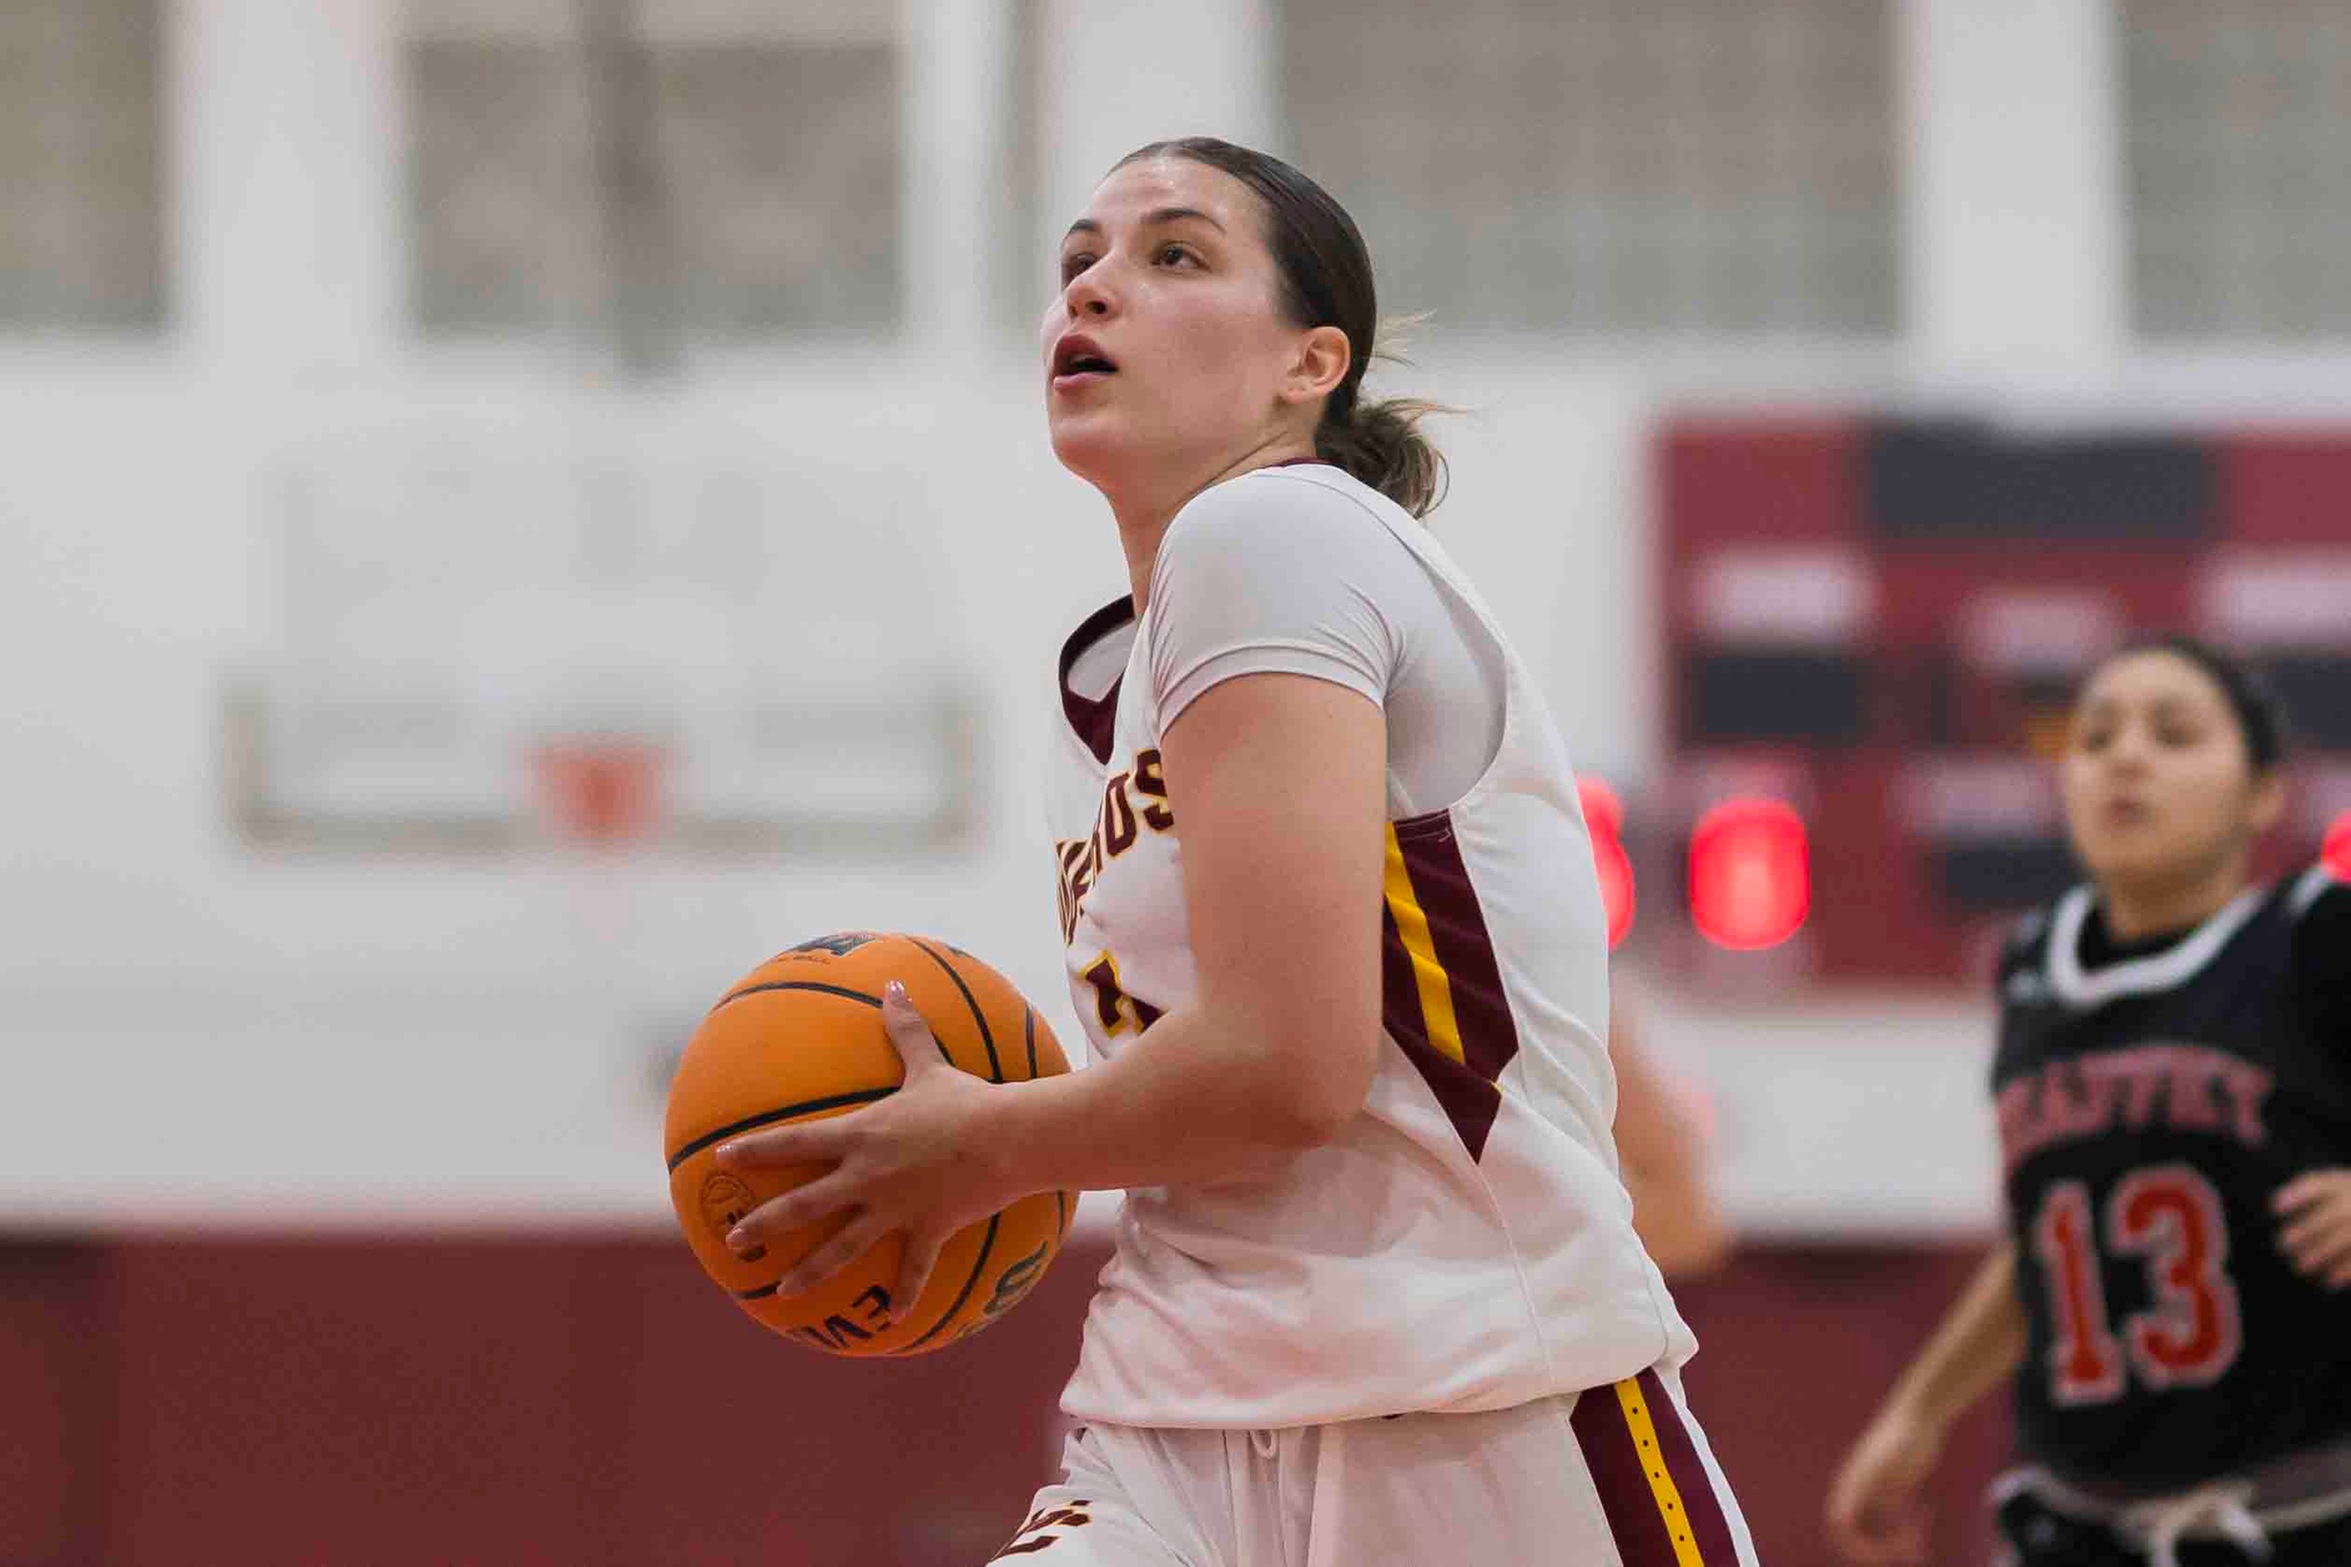 Glendale overcomes slow start to beat San Diego City College 59-40 Dec. 6 to improve to 6-2